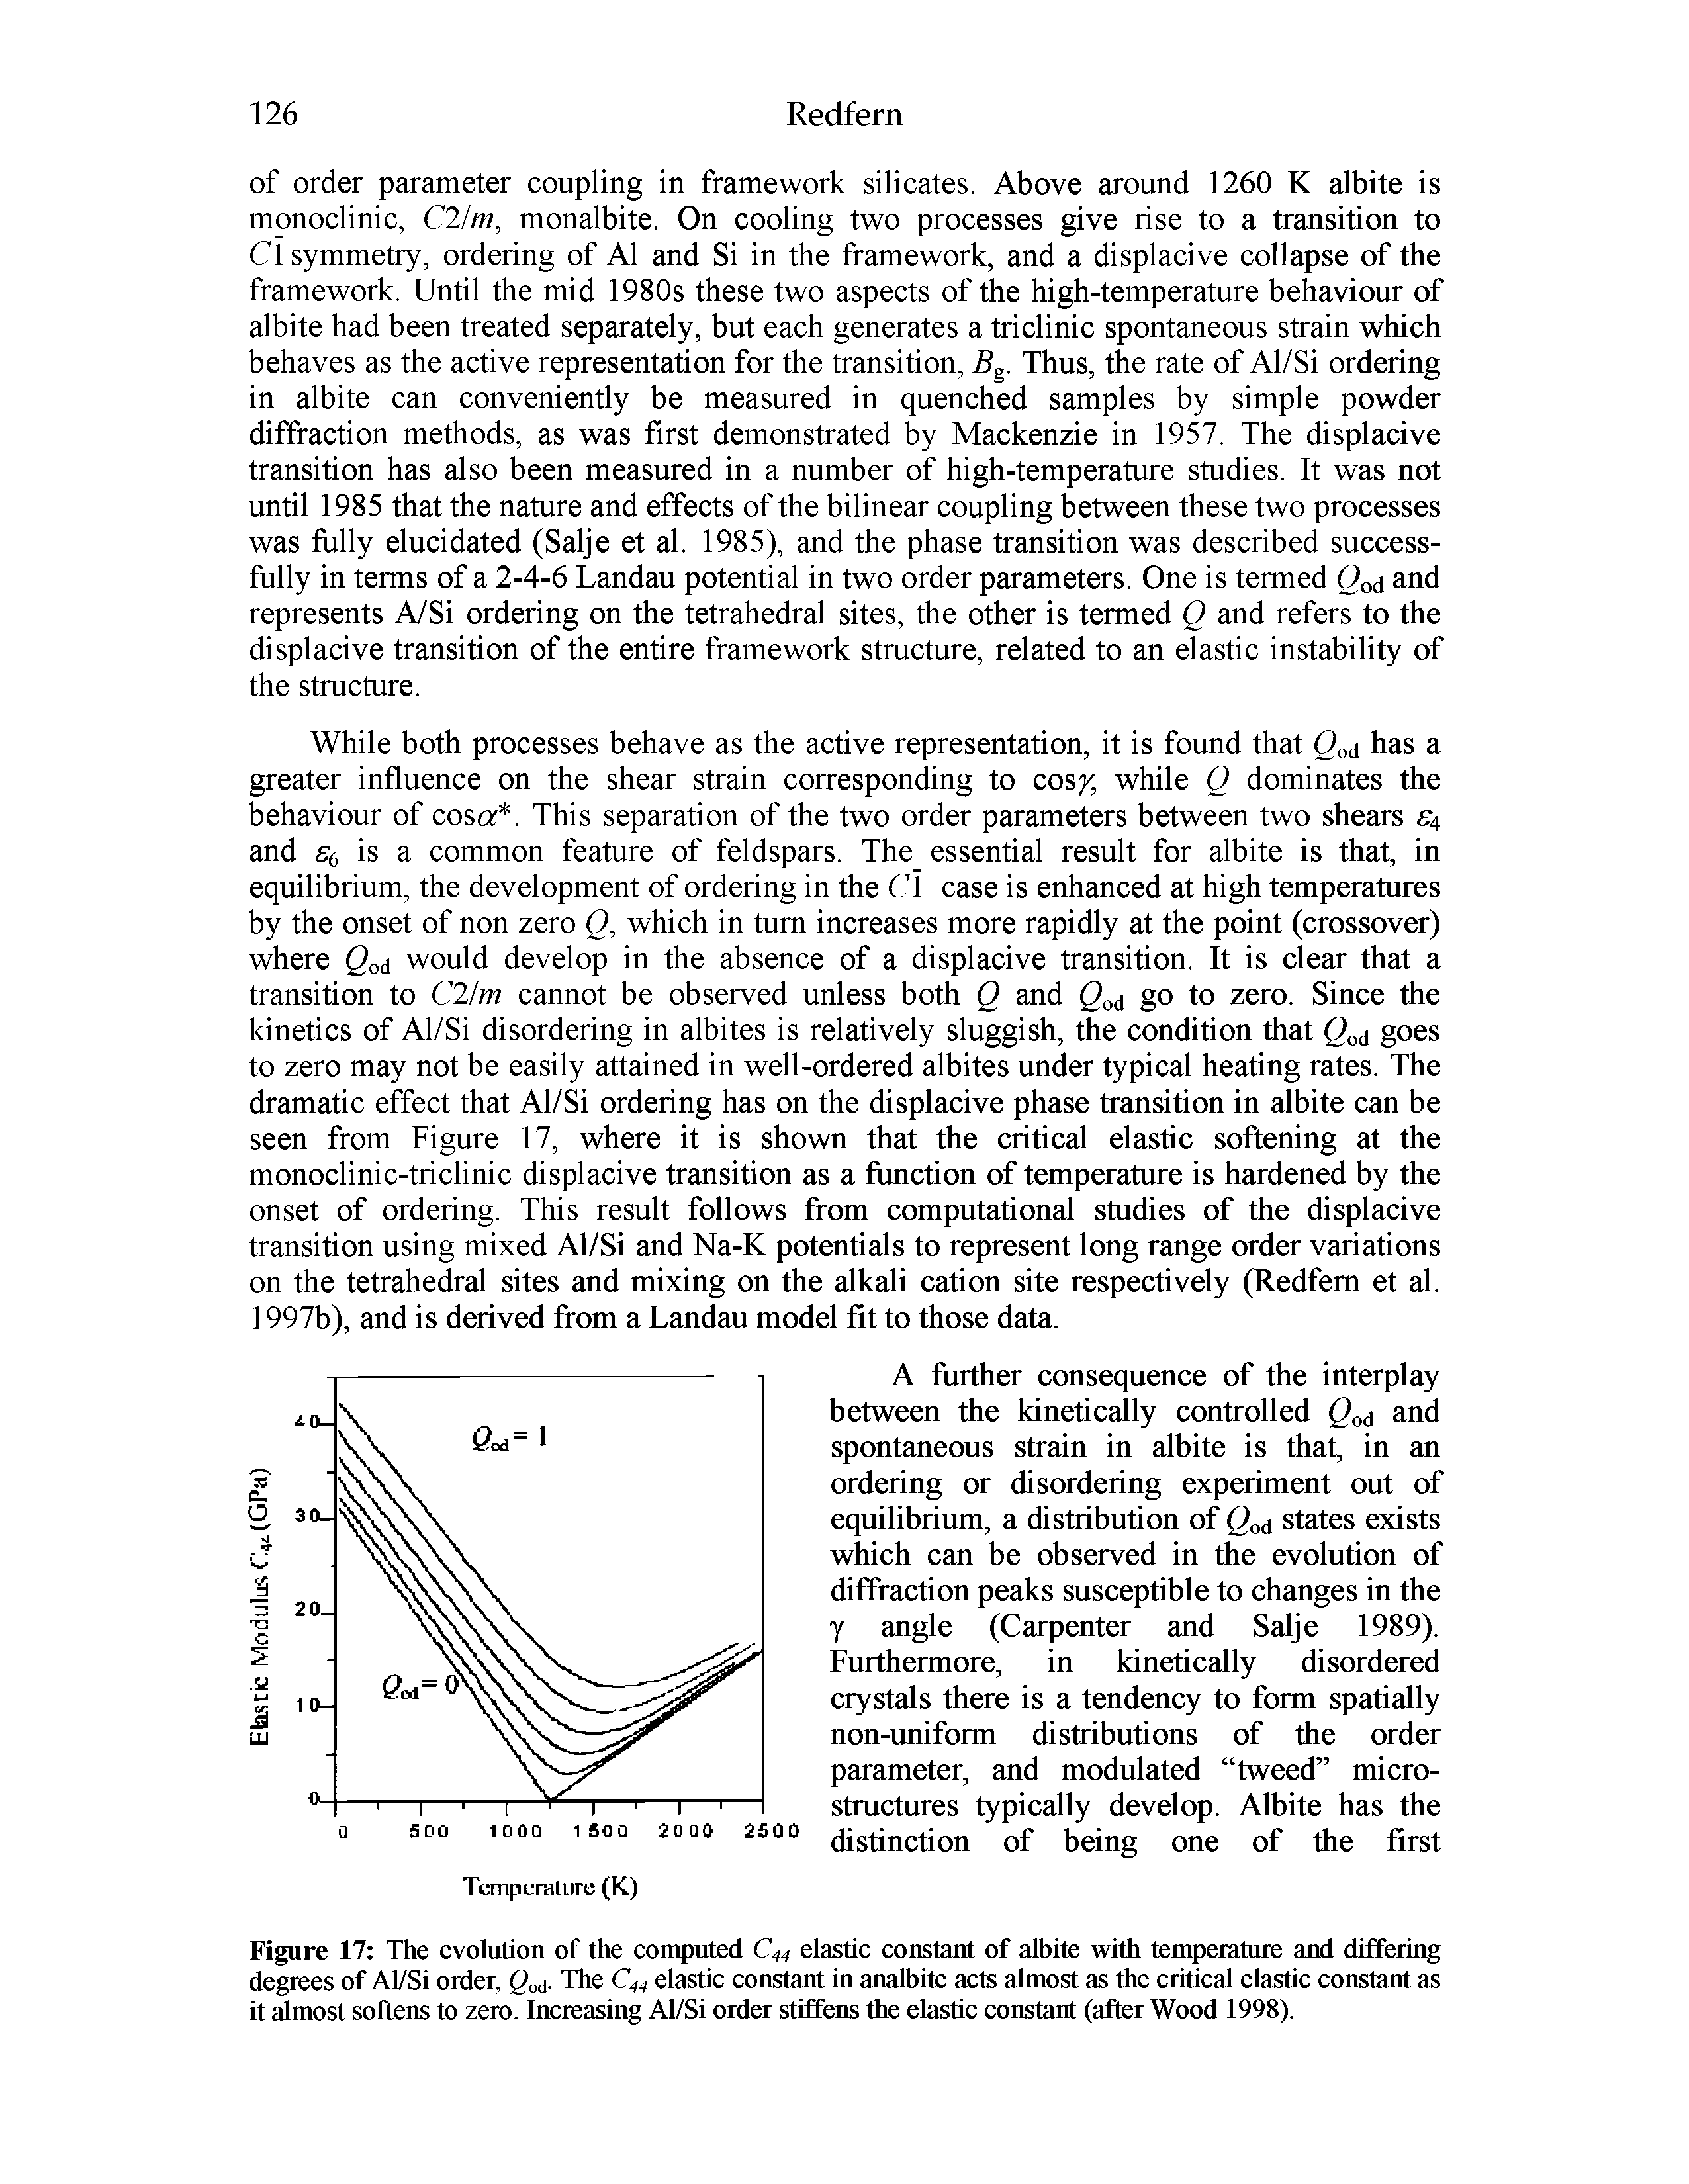 Figure 17 The evolution of the computed C44 elastic constant of albite with temperature and differing degrees of AFSi order, Qod- The C44 elastic constant in analbite acts almost as the critical elastic constant as it most softens to zero. Increasing Al/Si order stiffens the elastic constant (after Wood 1998).